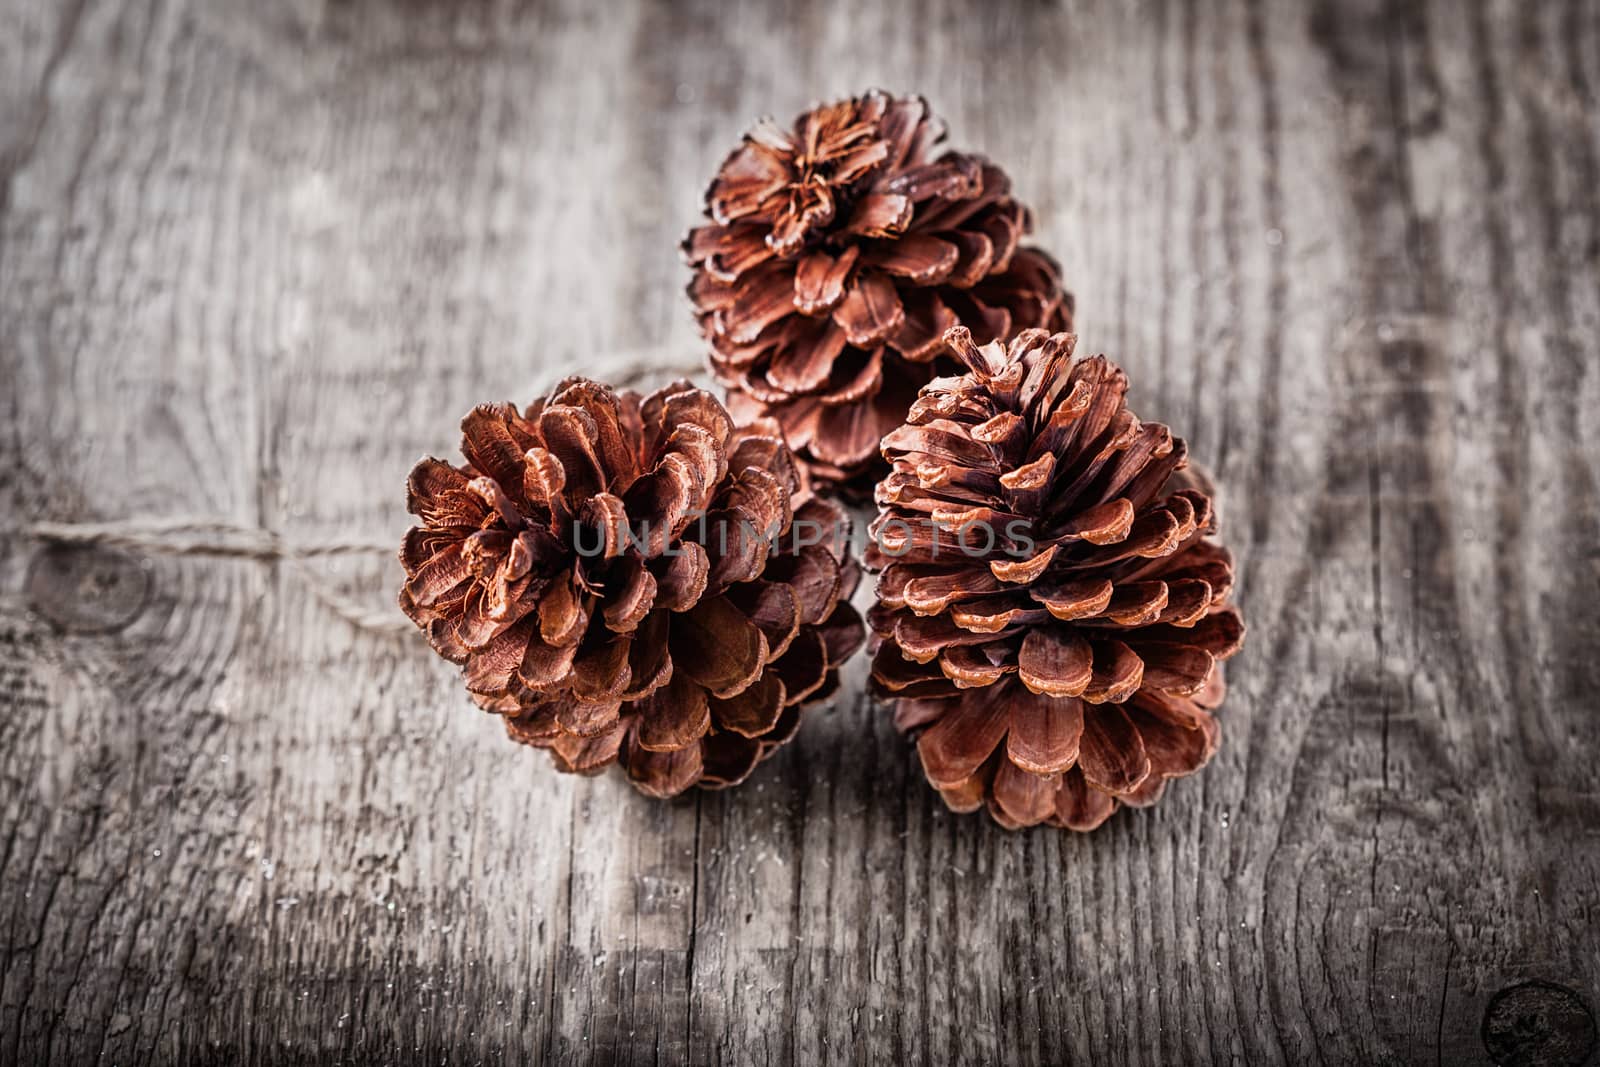 Natural wooden background with three pine cones